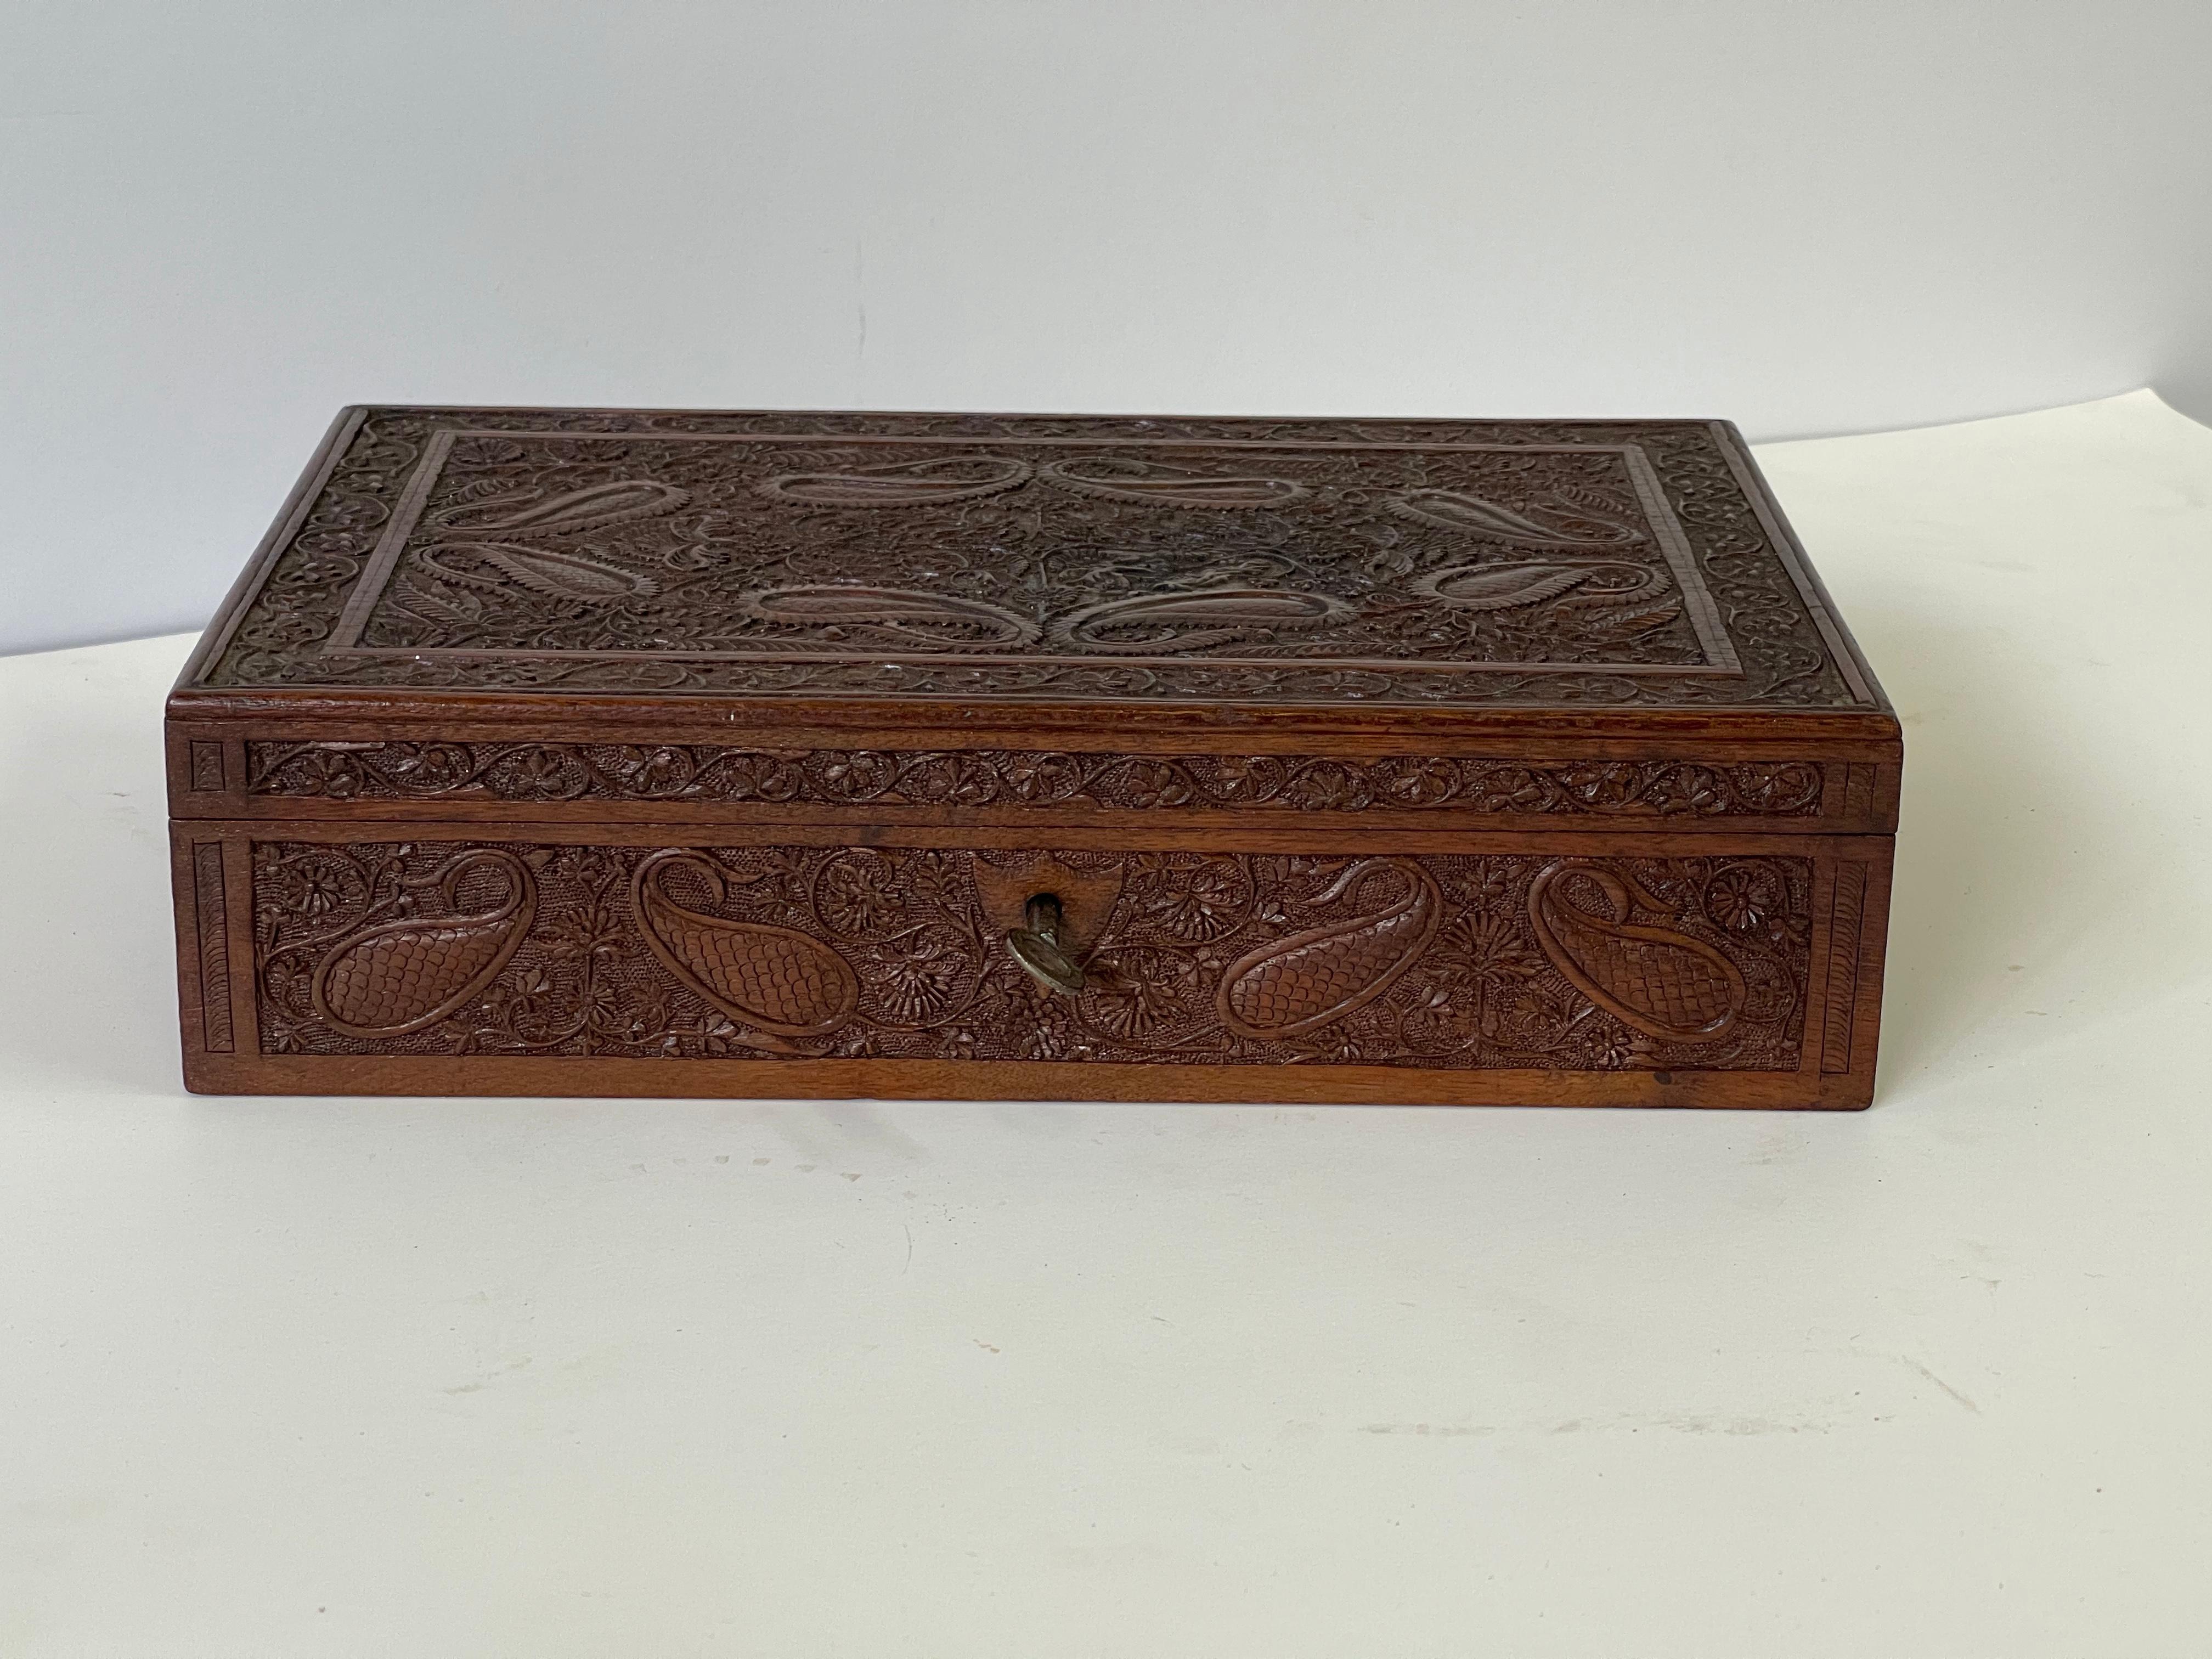 Early 20th century Anglo Raj wooden hand-carved jewelry box richly decorated overall with paisley and floral carvings. A hinged lid opens to a shallow relief carving on the interior and a divided compartment for storing valuables under the original